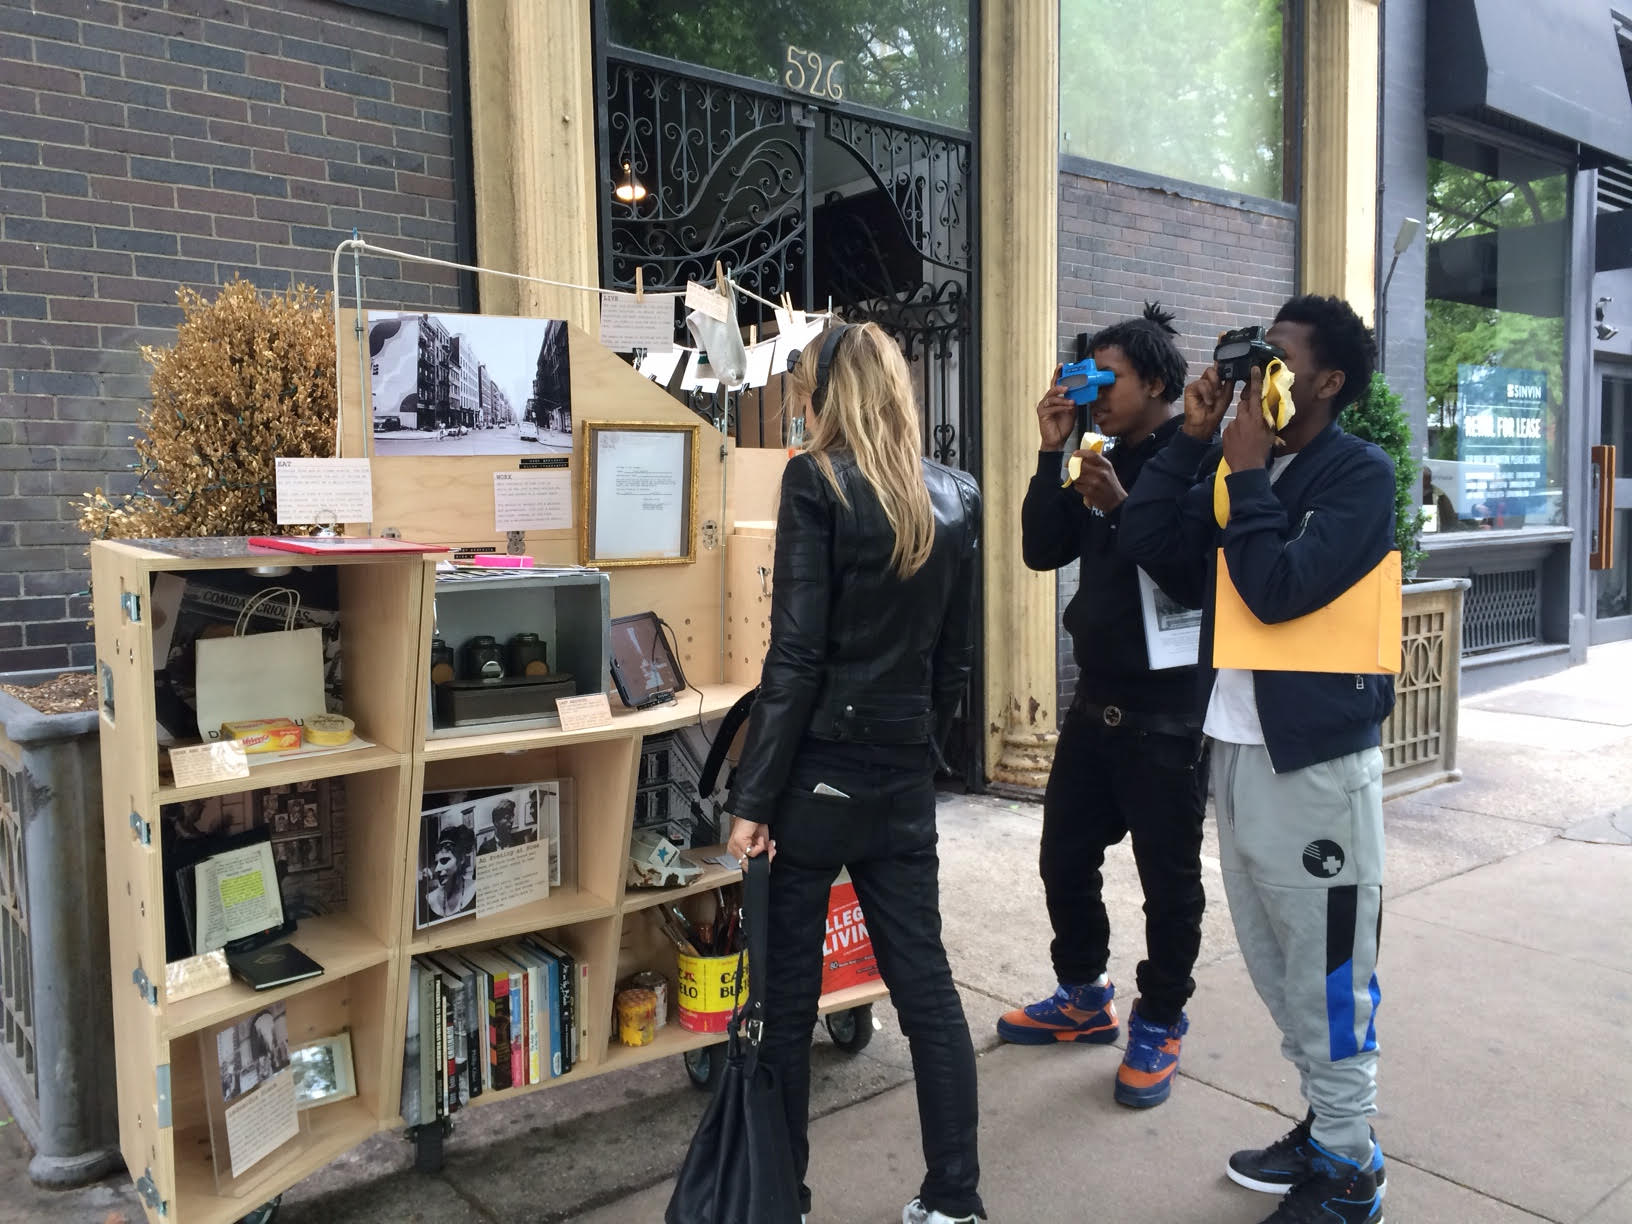 The SoHo Memory Project Portable Historical Society at the Renee and Chaim Gross Foundation in May 2016